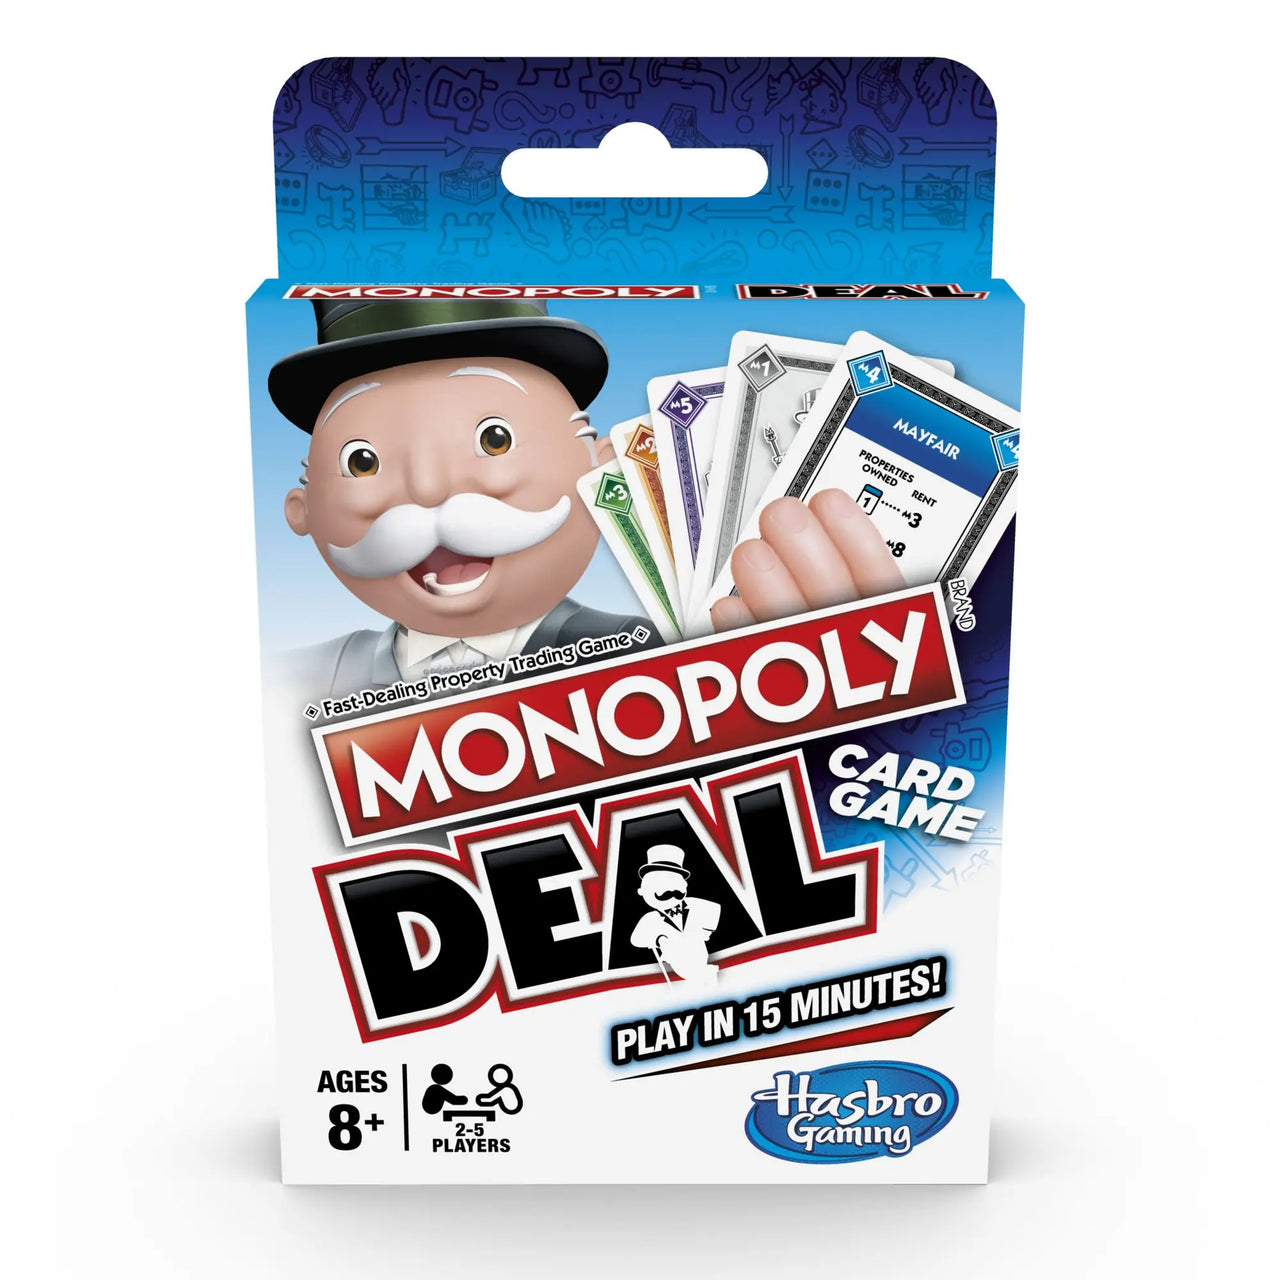 Monopoly Deal Card Game Hasbro Gaming